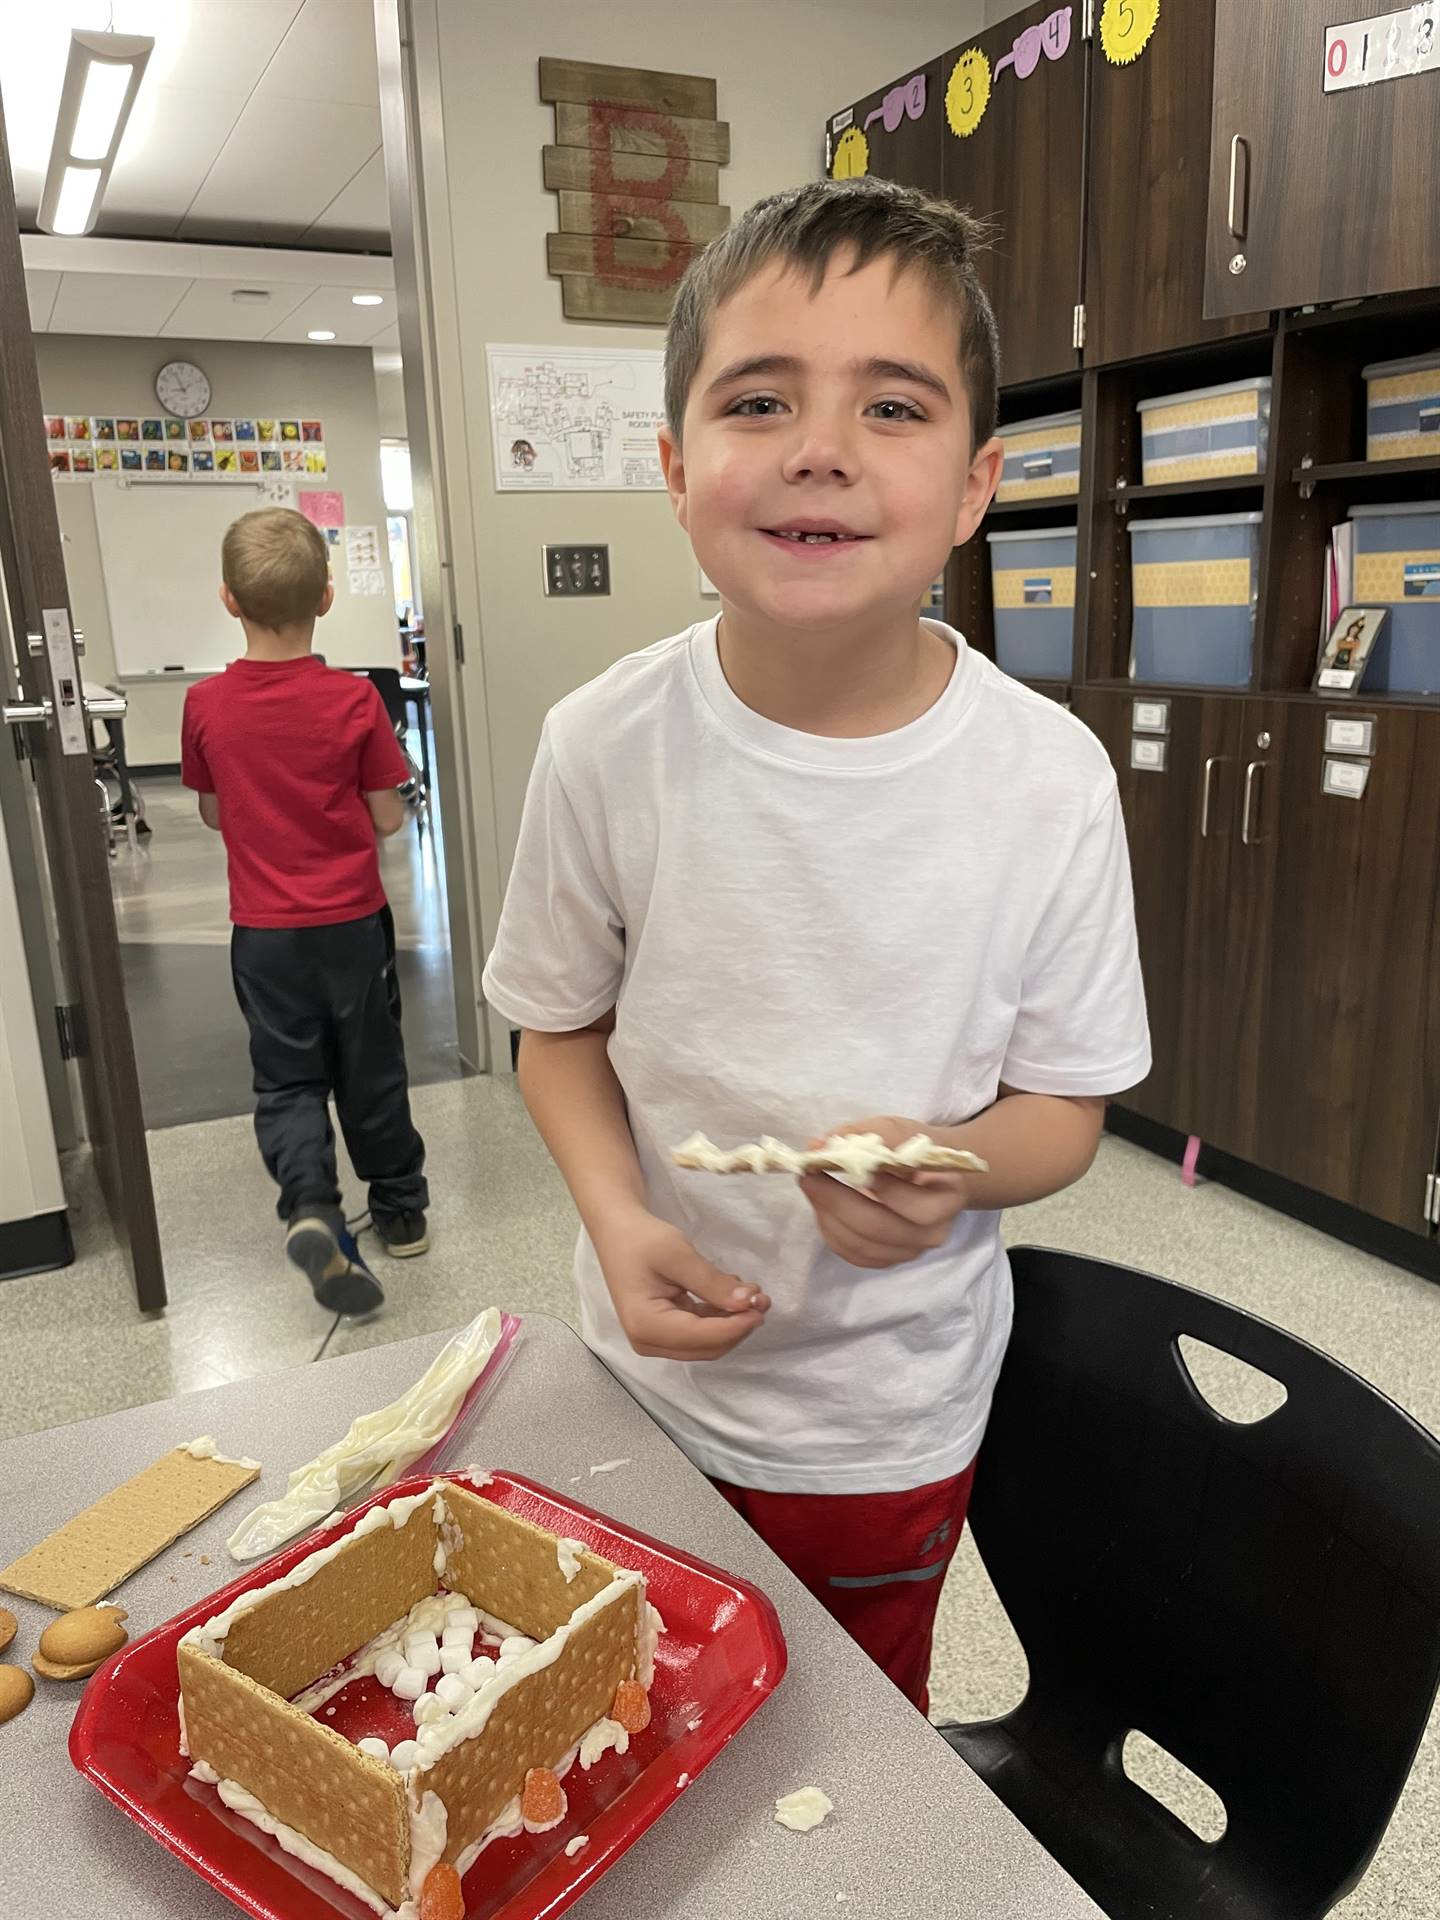 Ethan with gingerbread house